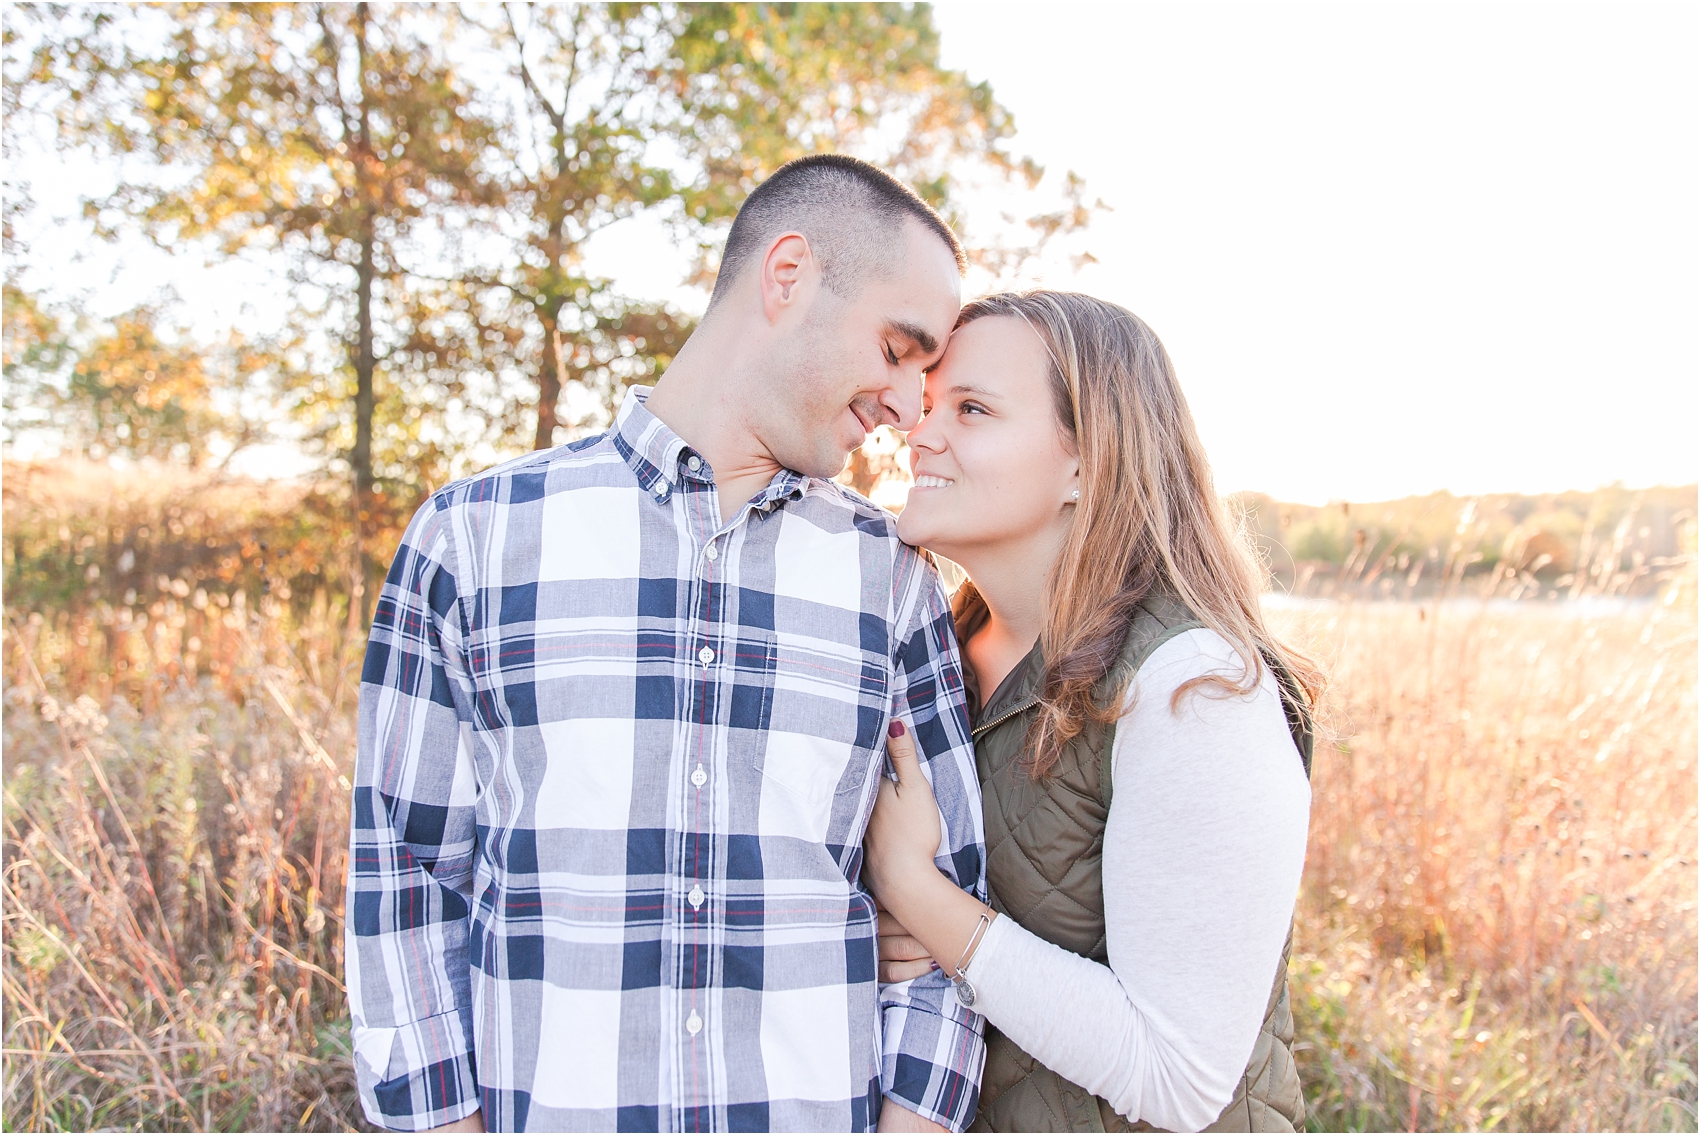 romantic-fall-engagement-photos-at-indian-springs-metropark-in-clarkston-mi-by-courtney-carolyn-photography_0025.jpg